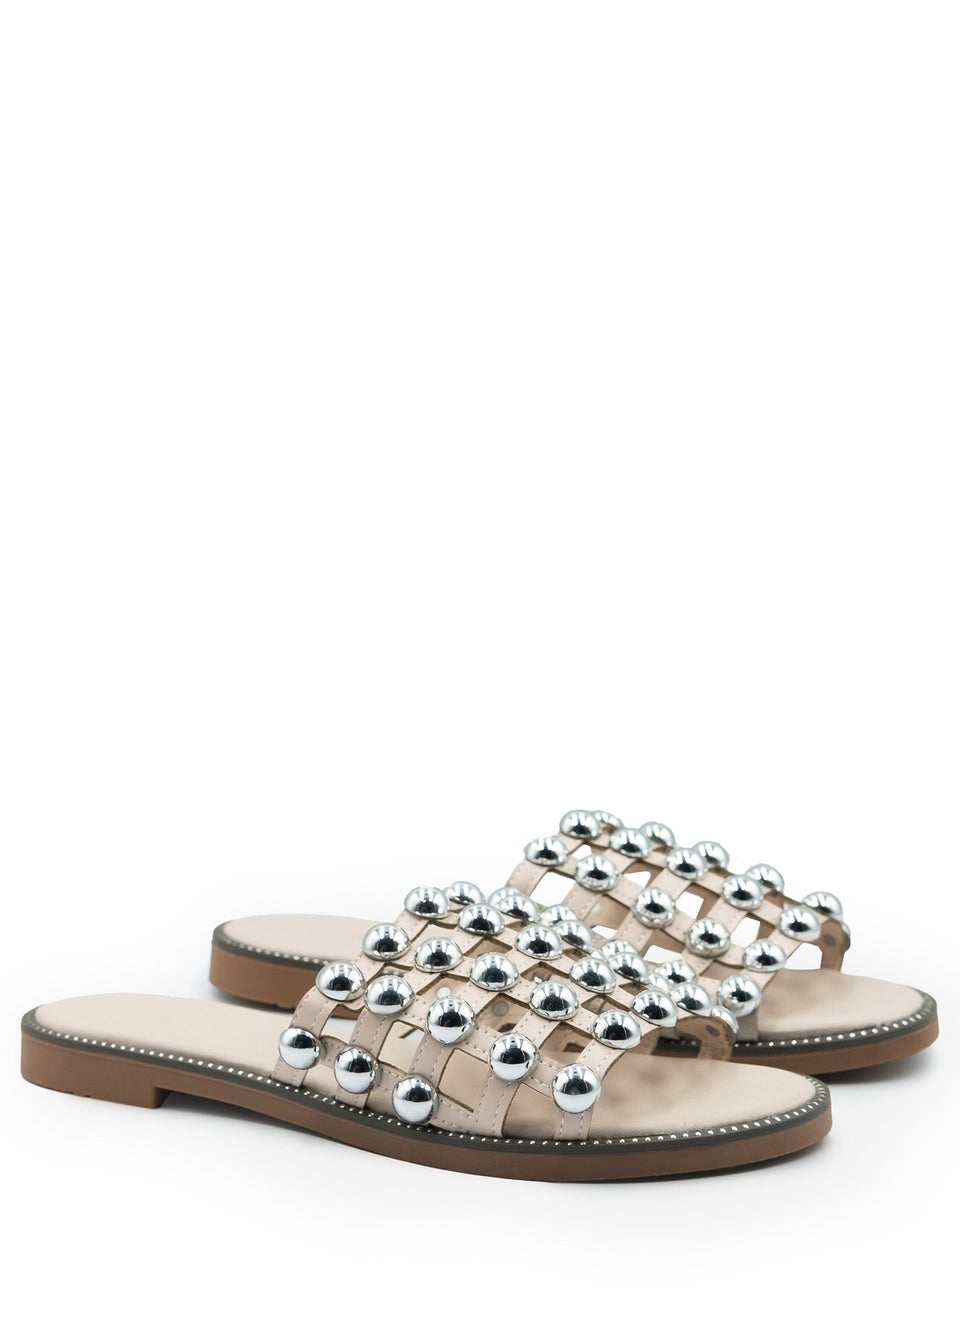 Where's That From Nude Pu Kelly Sliders With Studded Detailing